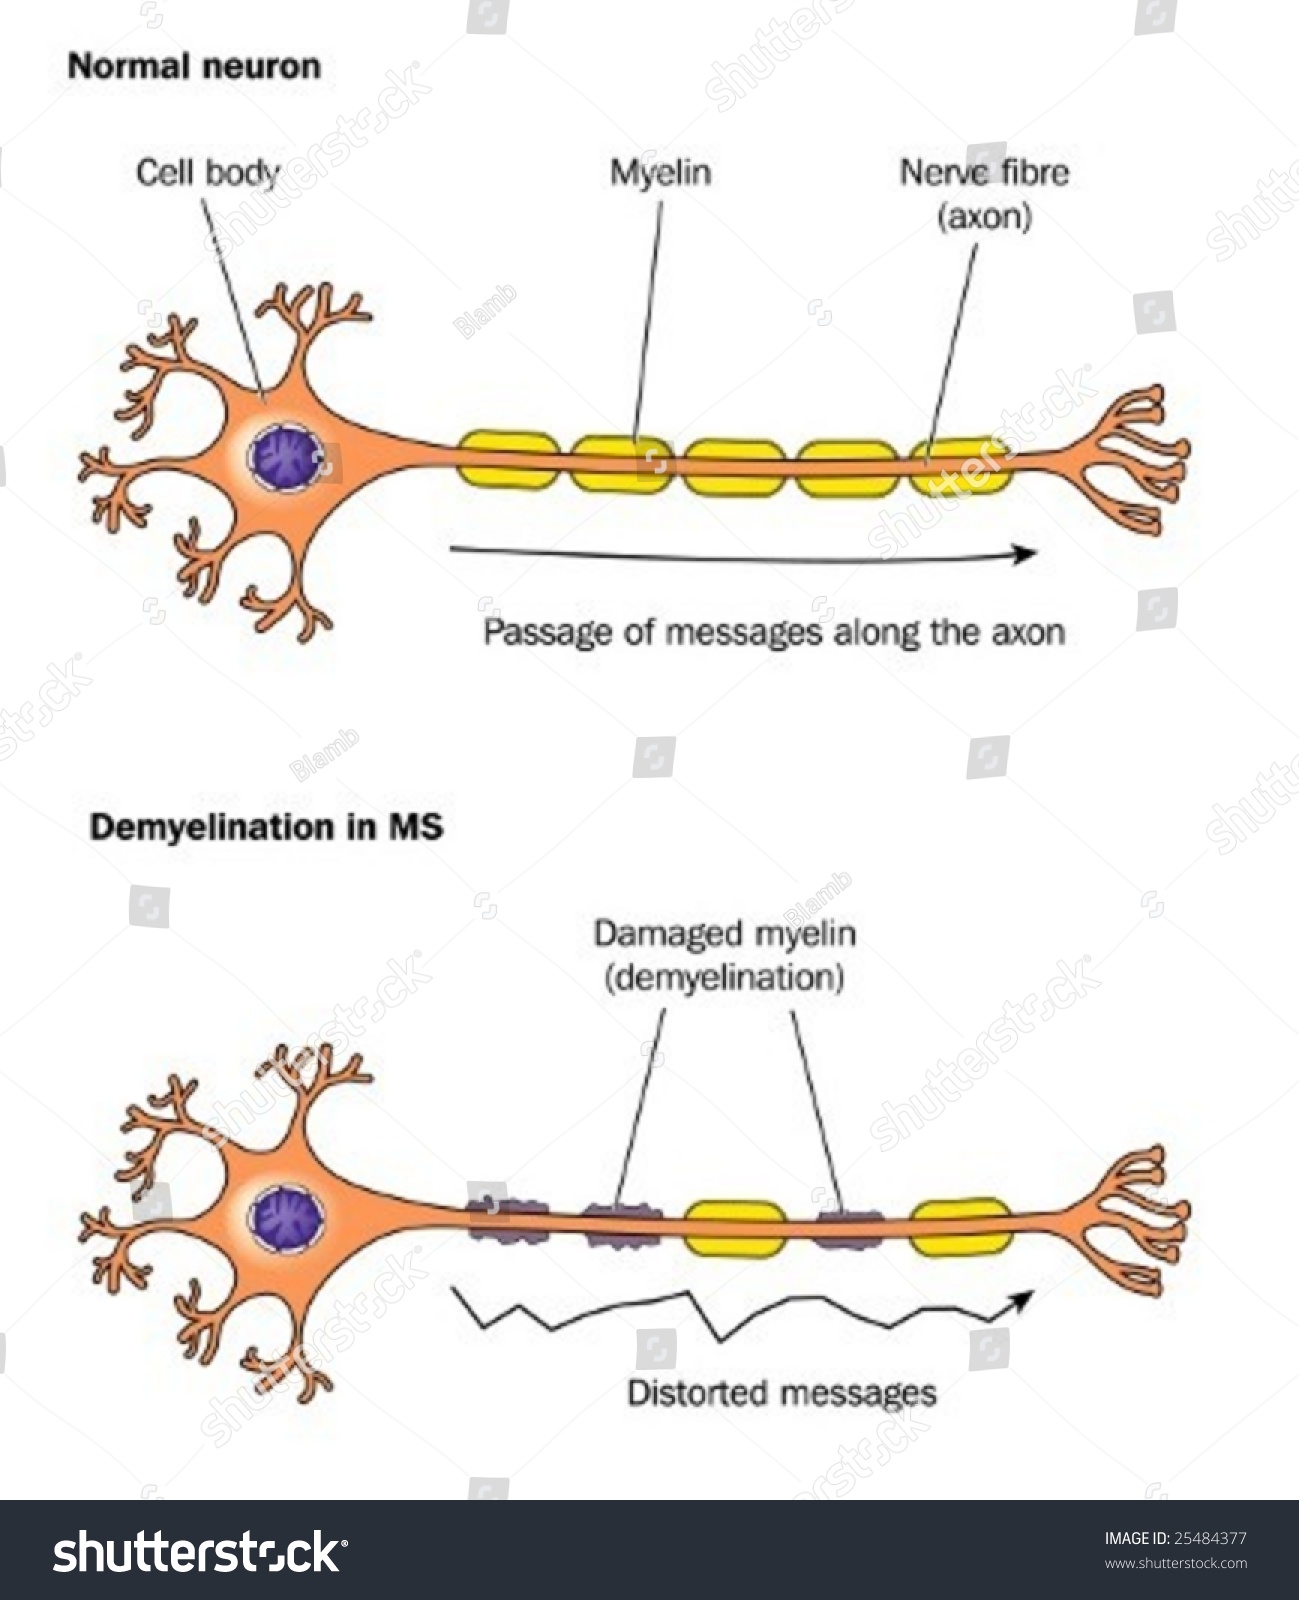 Demyelination in multiple sclerosis - labeled